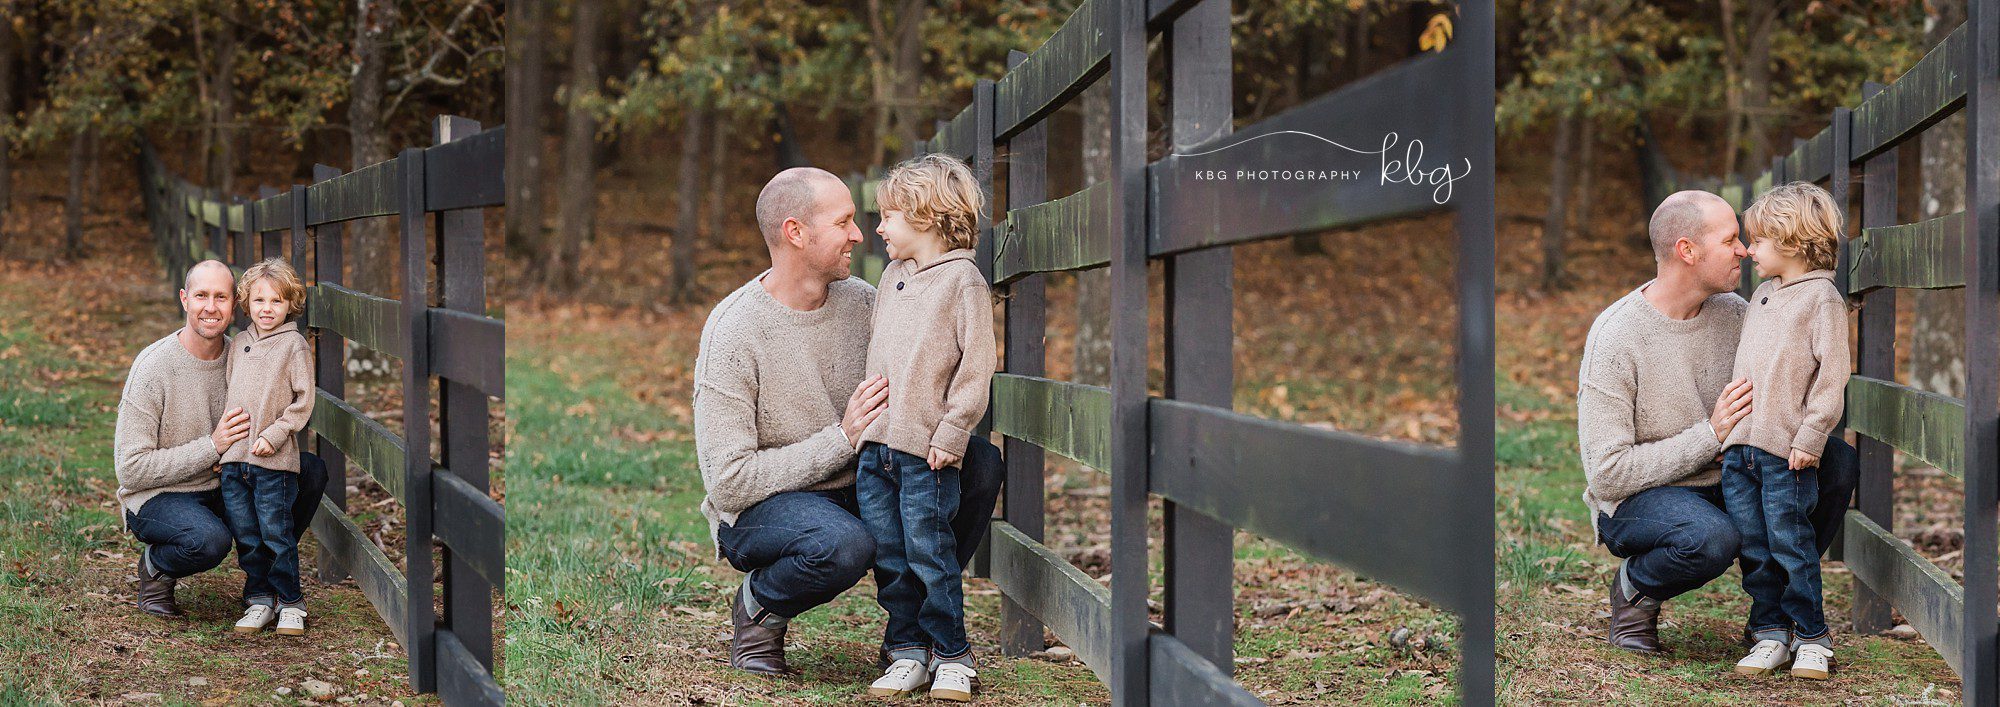 father and son playing together - Marietta Photographer